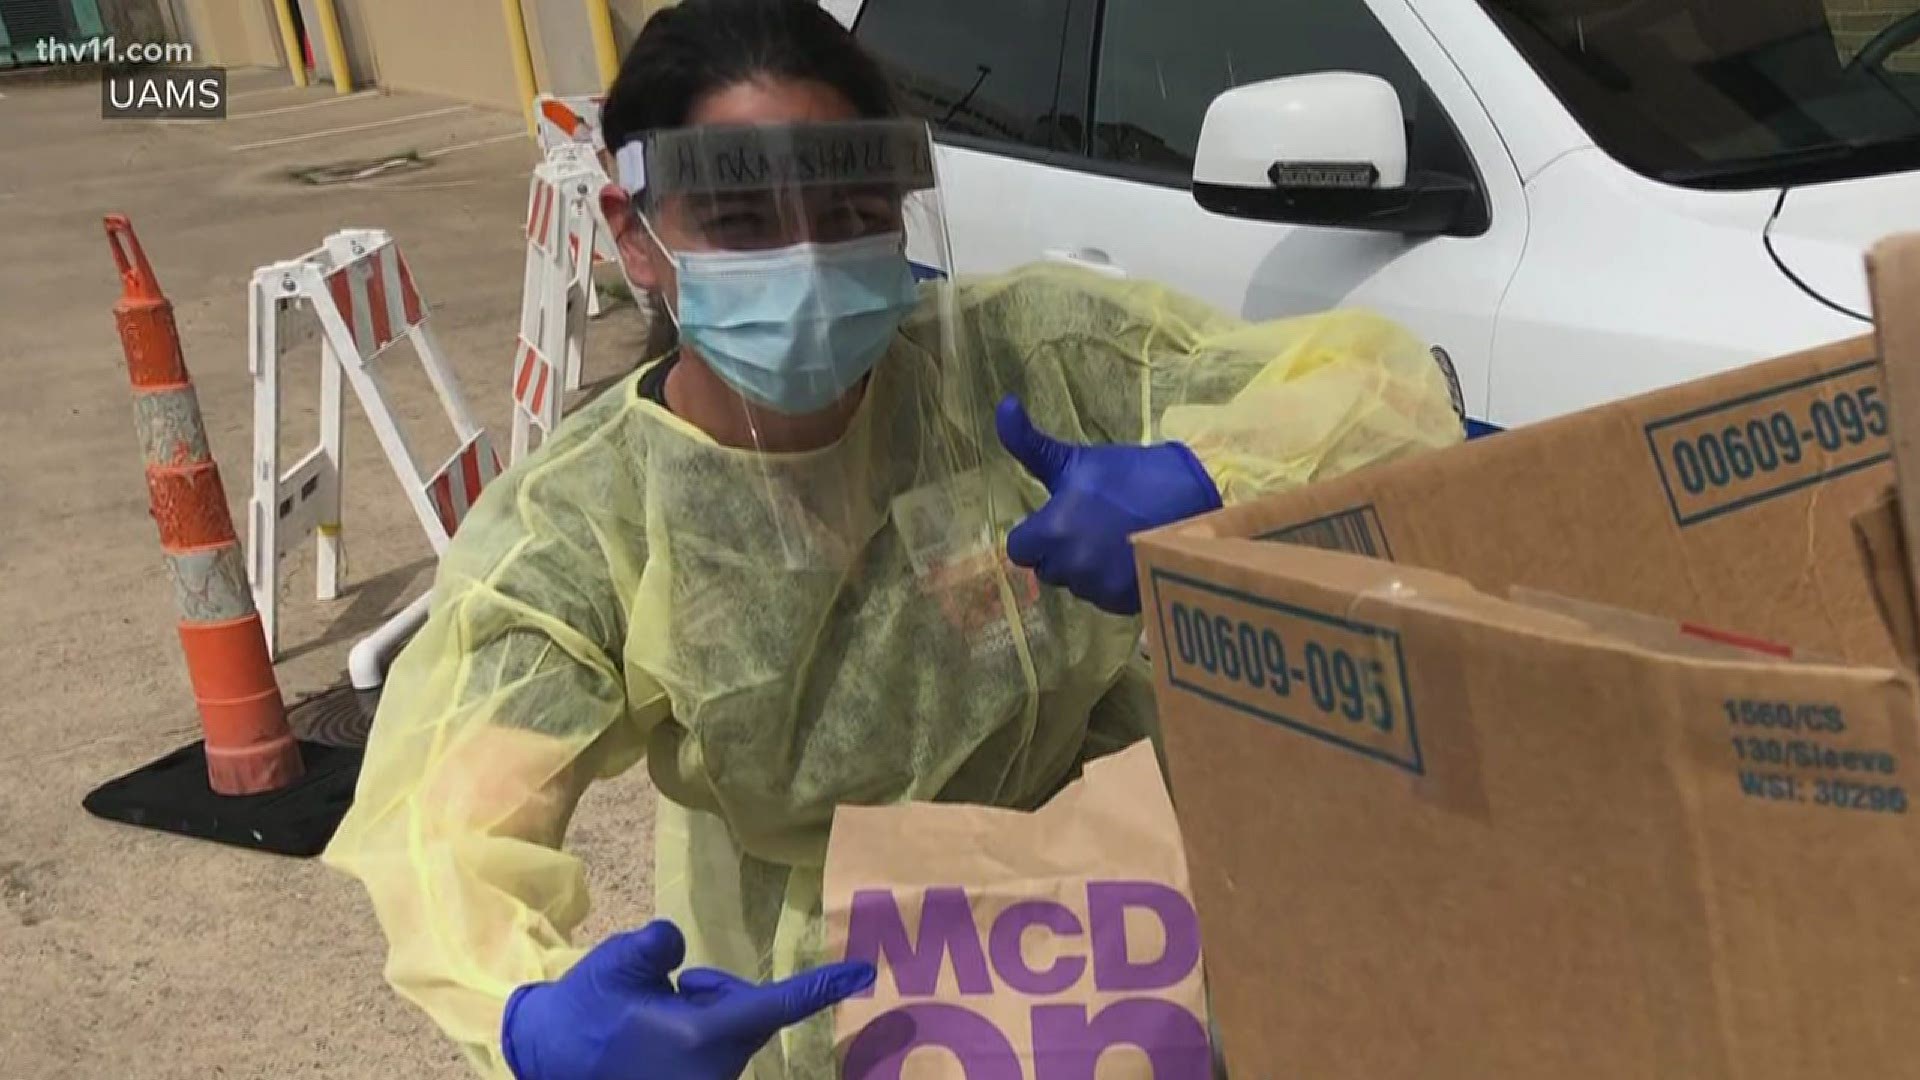 Every day, thousands of people across Arkansas are on the frontlines of the COVID-19 pandemic — treating patients and keeping hospitals running.